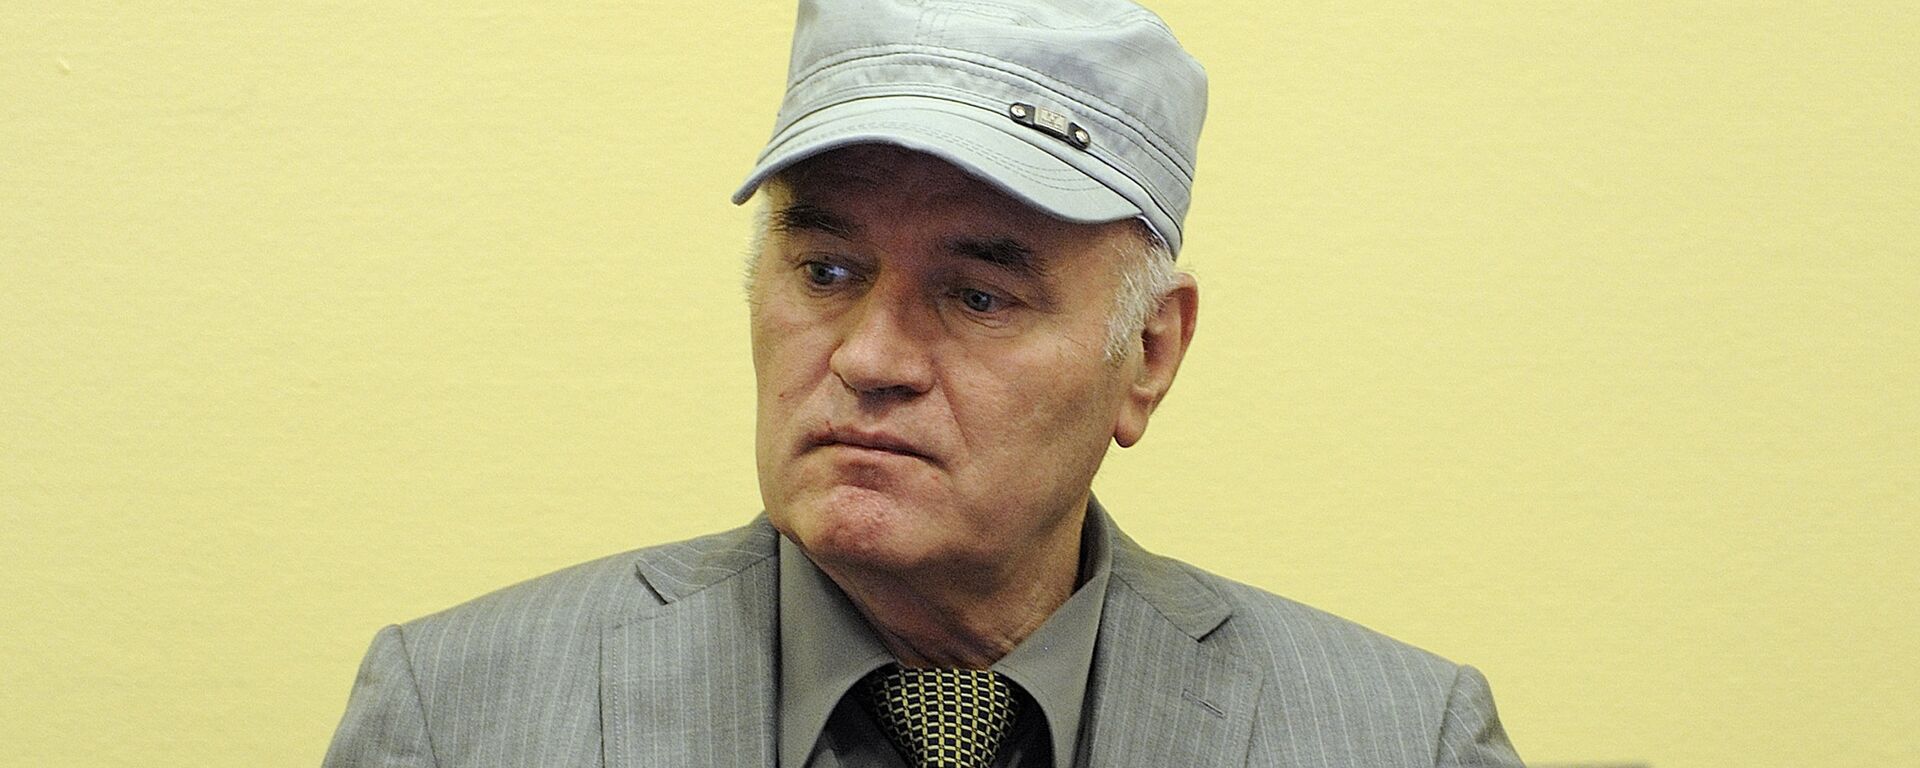 Wartime Bosnian Serb army chief Ratko Mladic sits in the court during his initial appearance at UN war crimes tribunal in The Hague - Sputnik Mundo, 1920, 26.08.2020